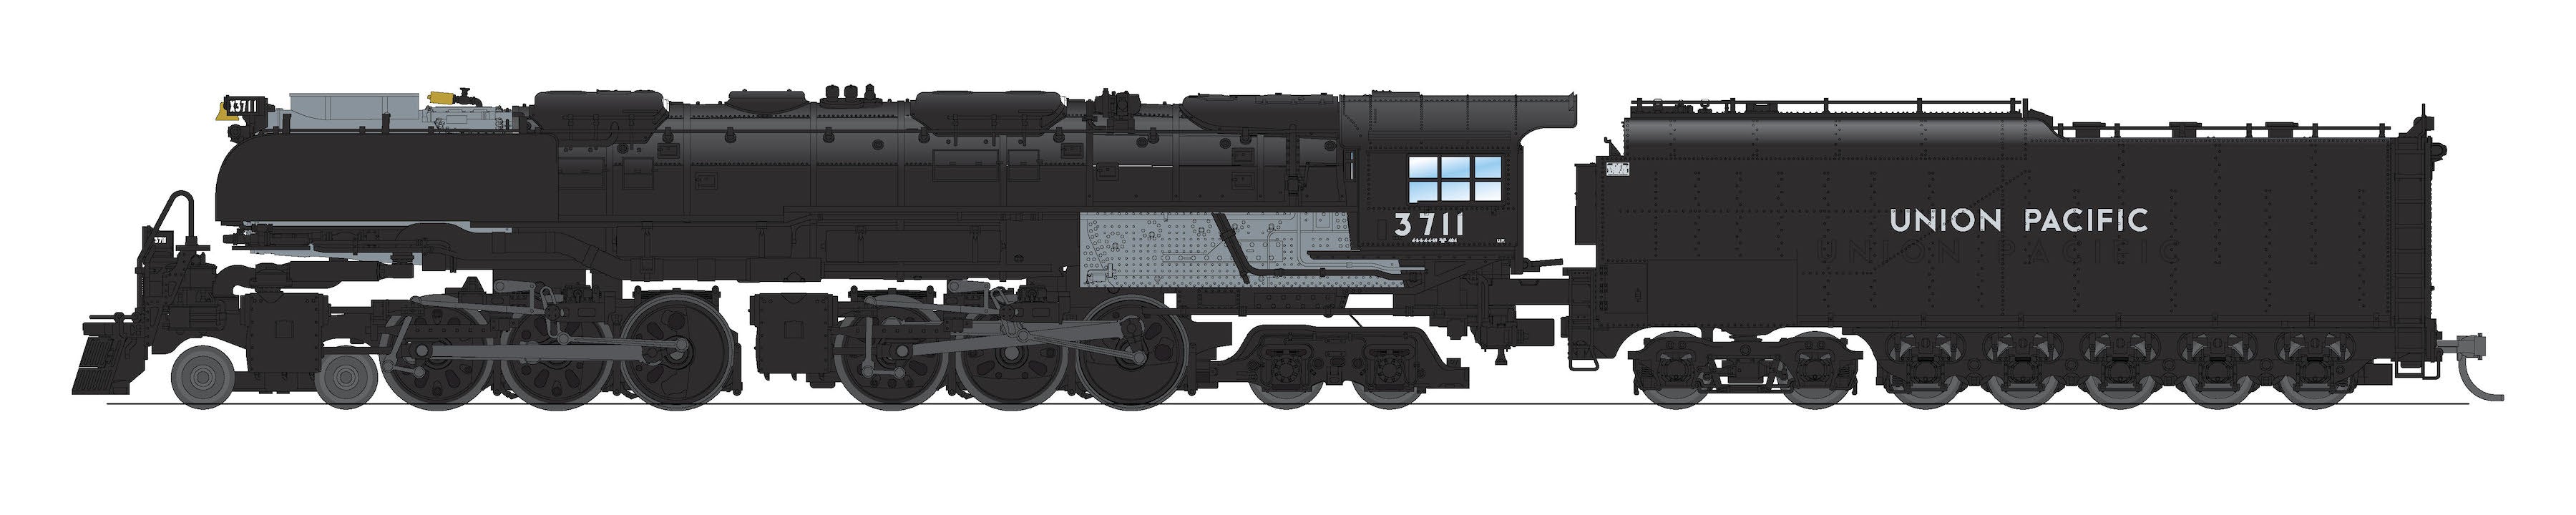 6983 UP Challenger 4-6-6-4, #3714, Black & Graphite, Oil Tender, w/ wind wings, Paragon4 Sound/DC/DCC, Smoke, N